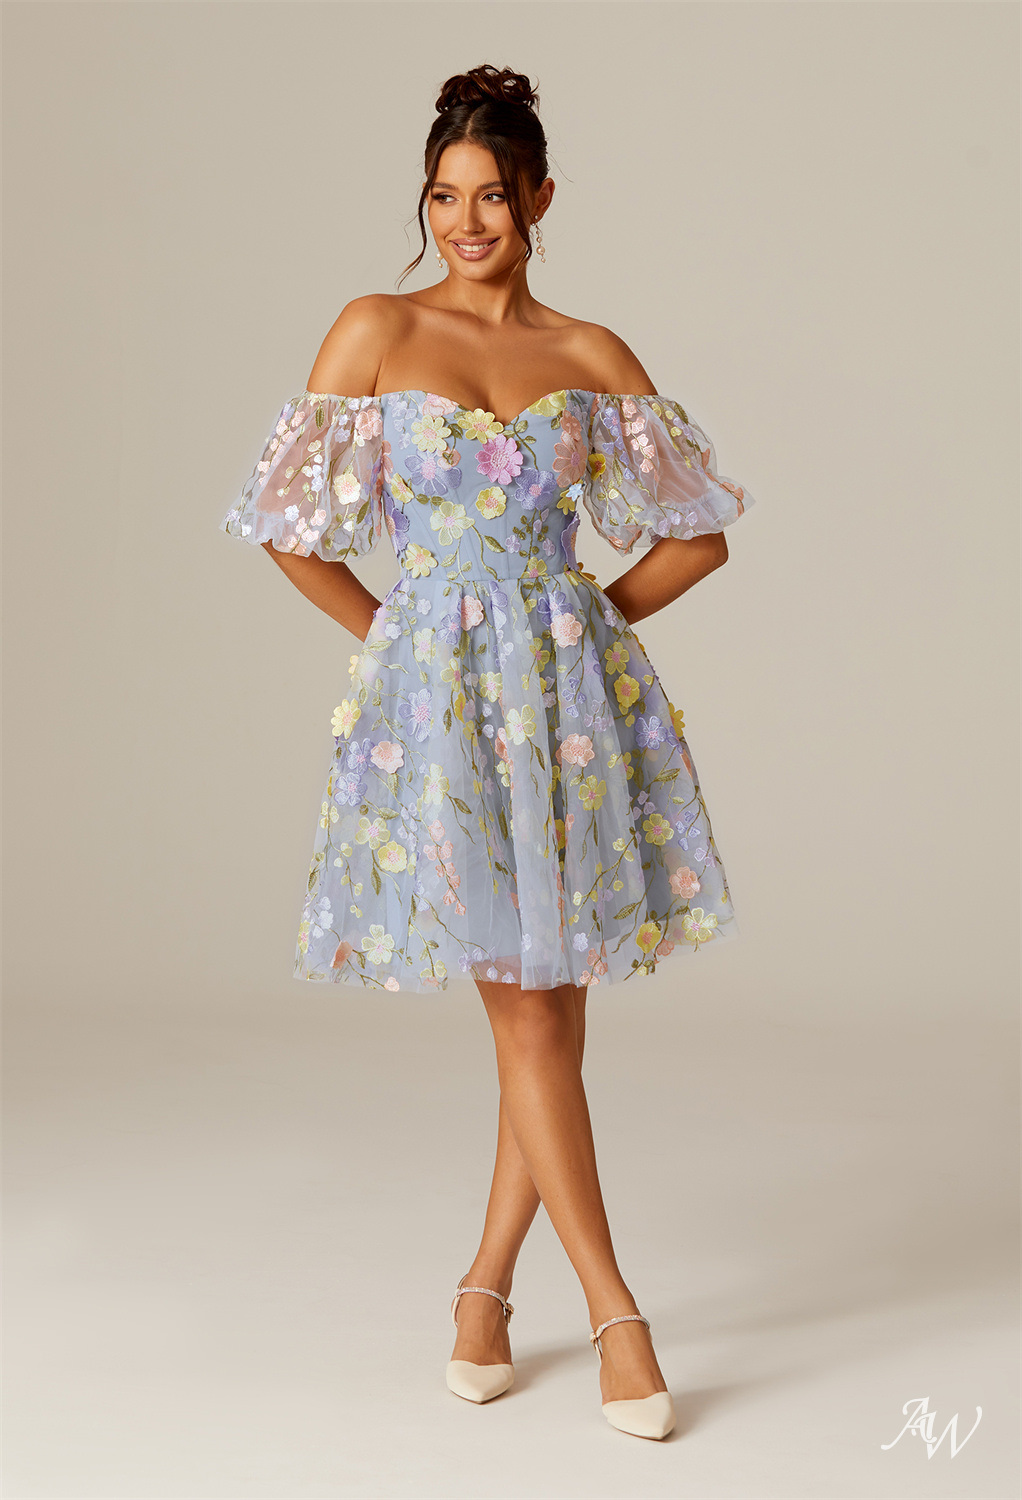 Short blue Floral dress by AW Bridal 